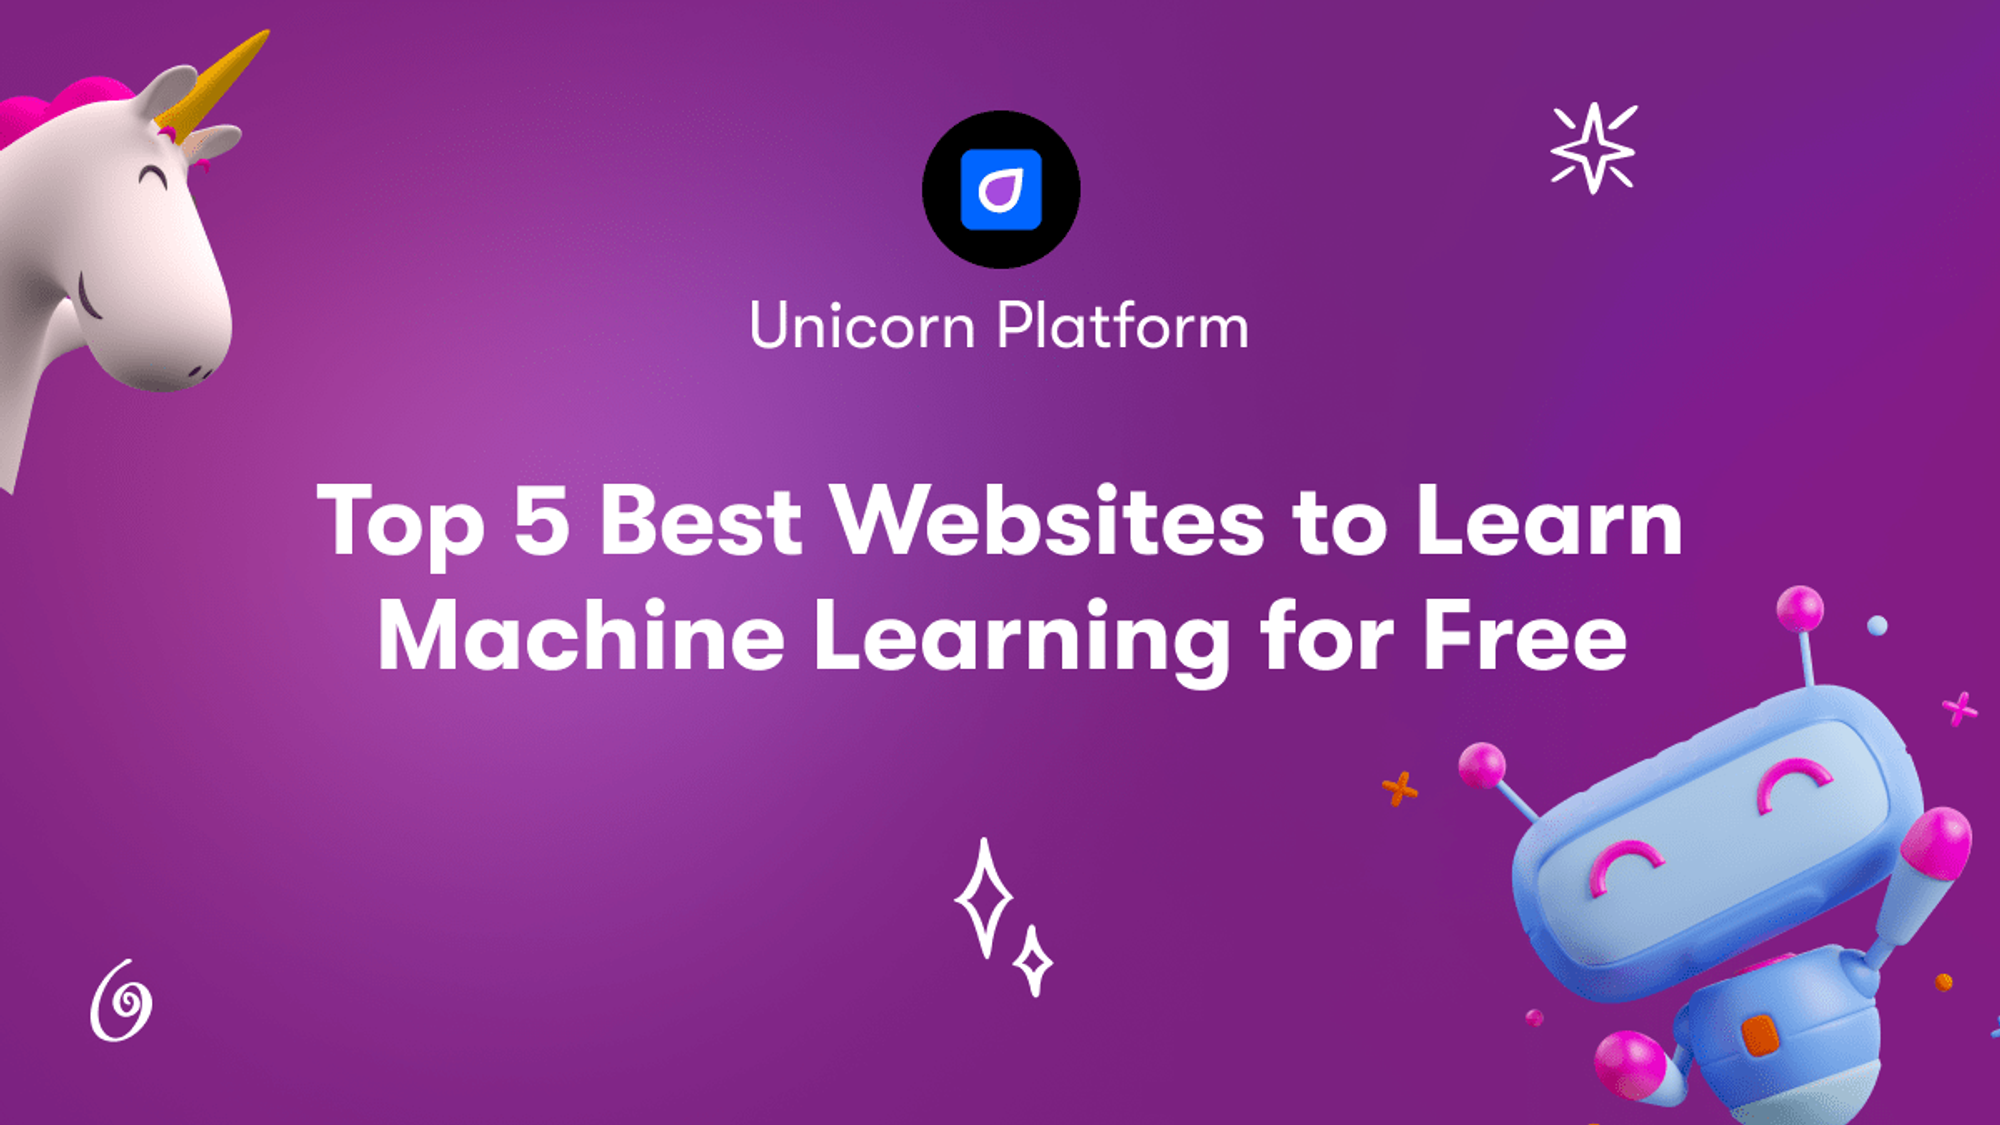 Top 5 Best Websites to Learn Machine Learning for Free